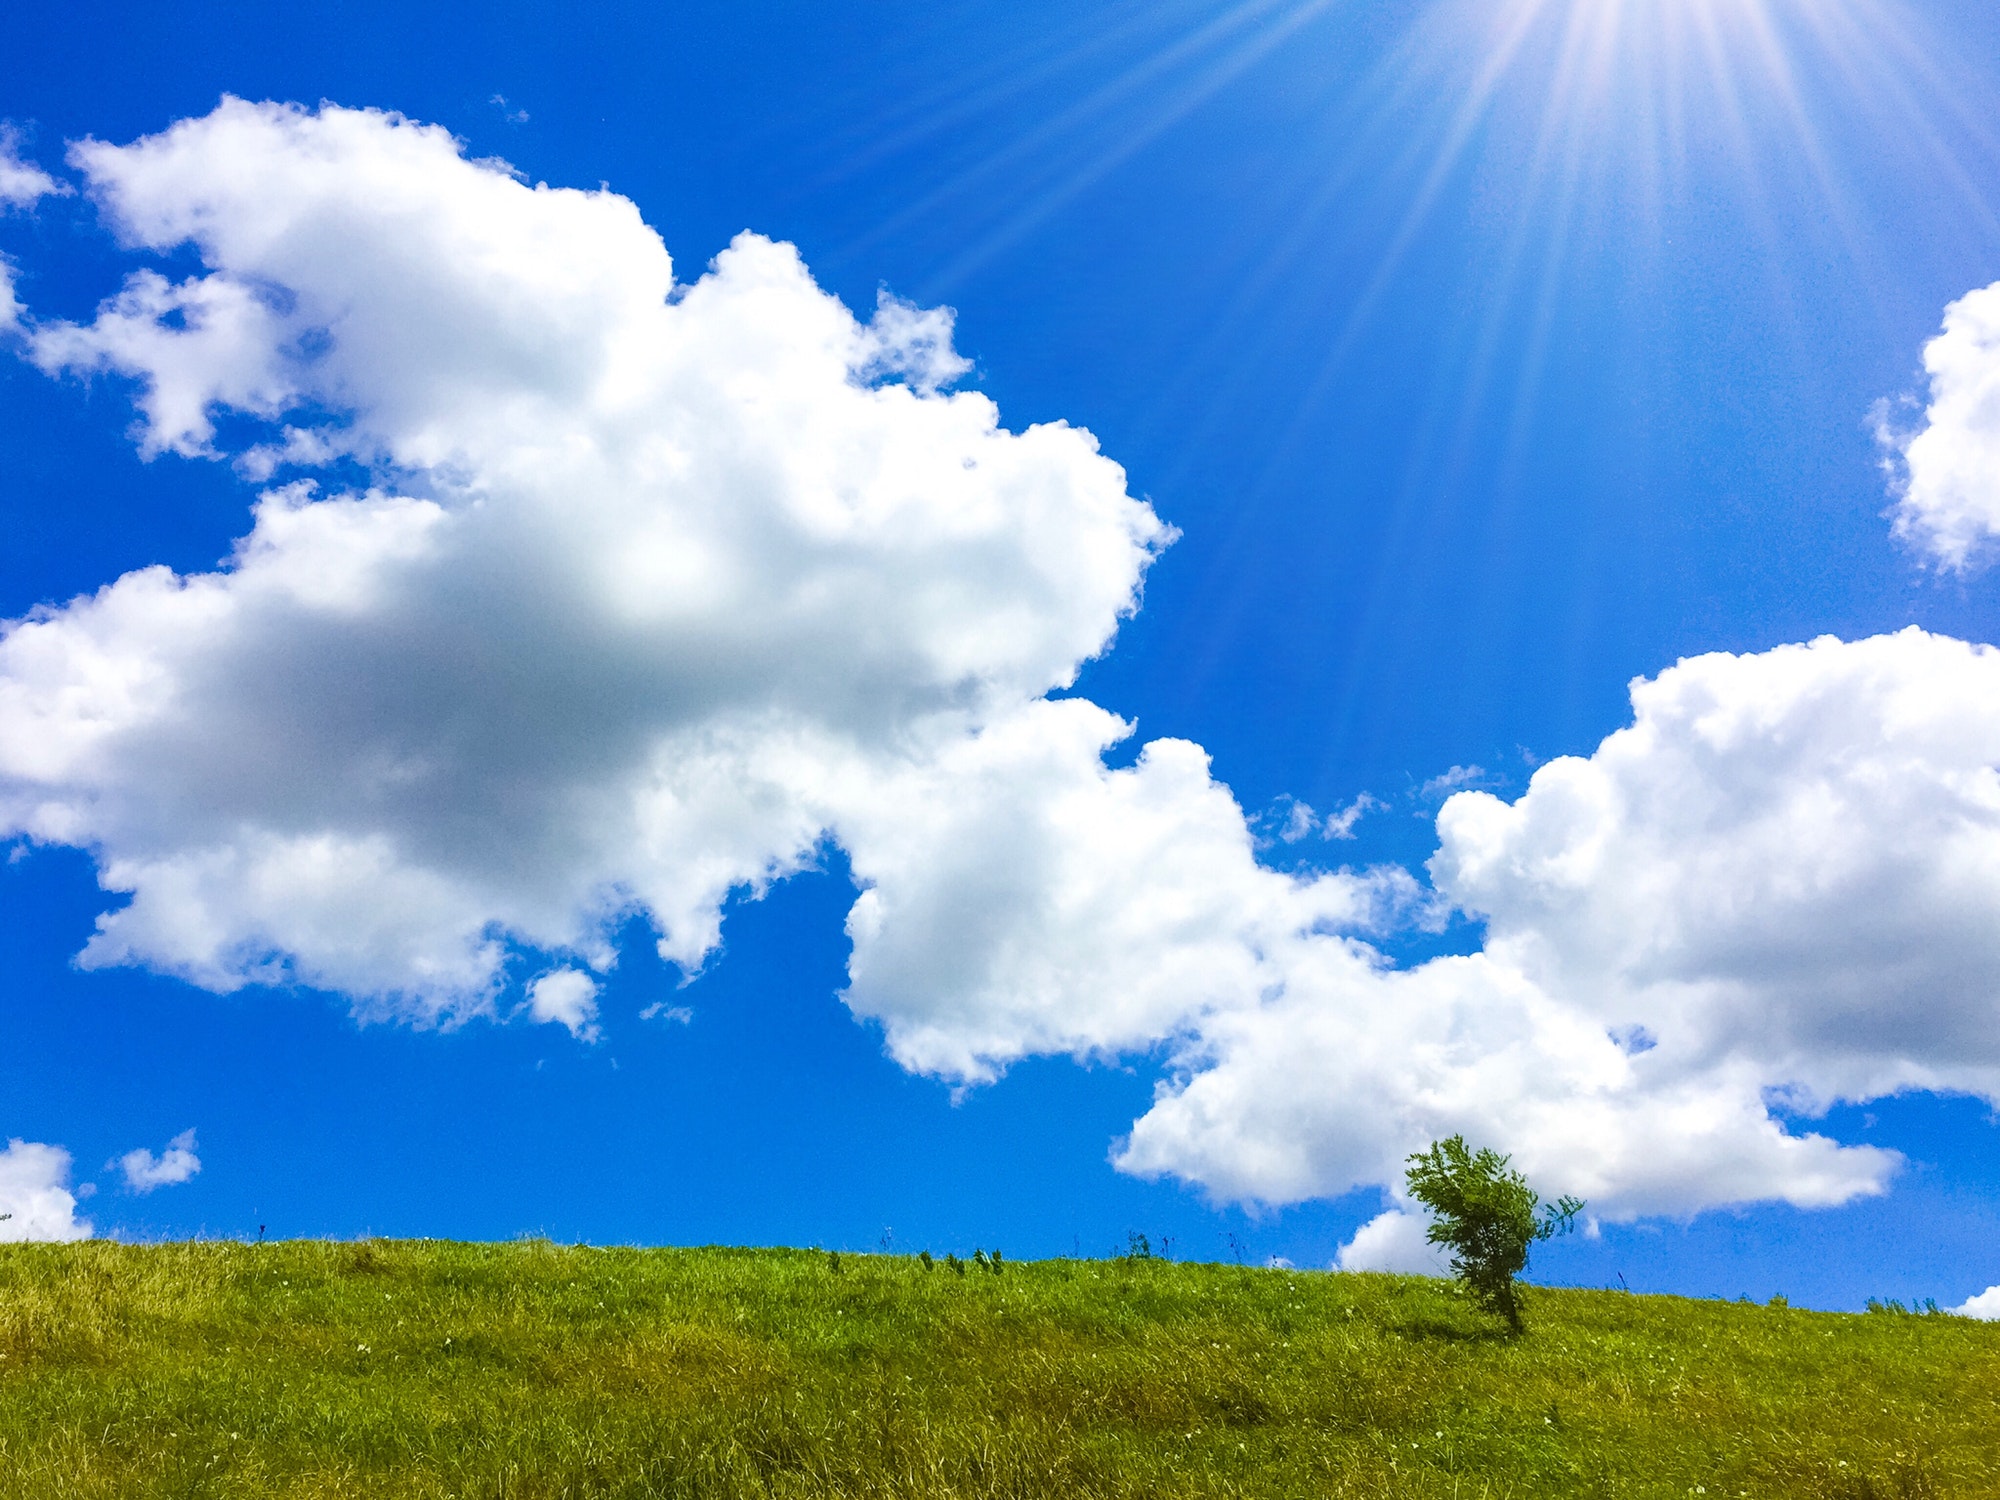 A green hill in an open field under a blue sky with the sun shining brightly.